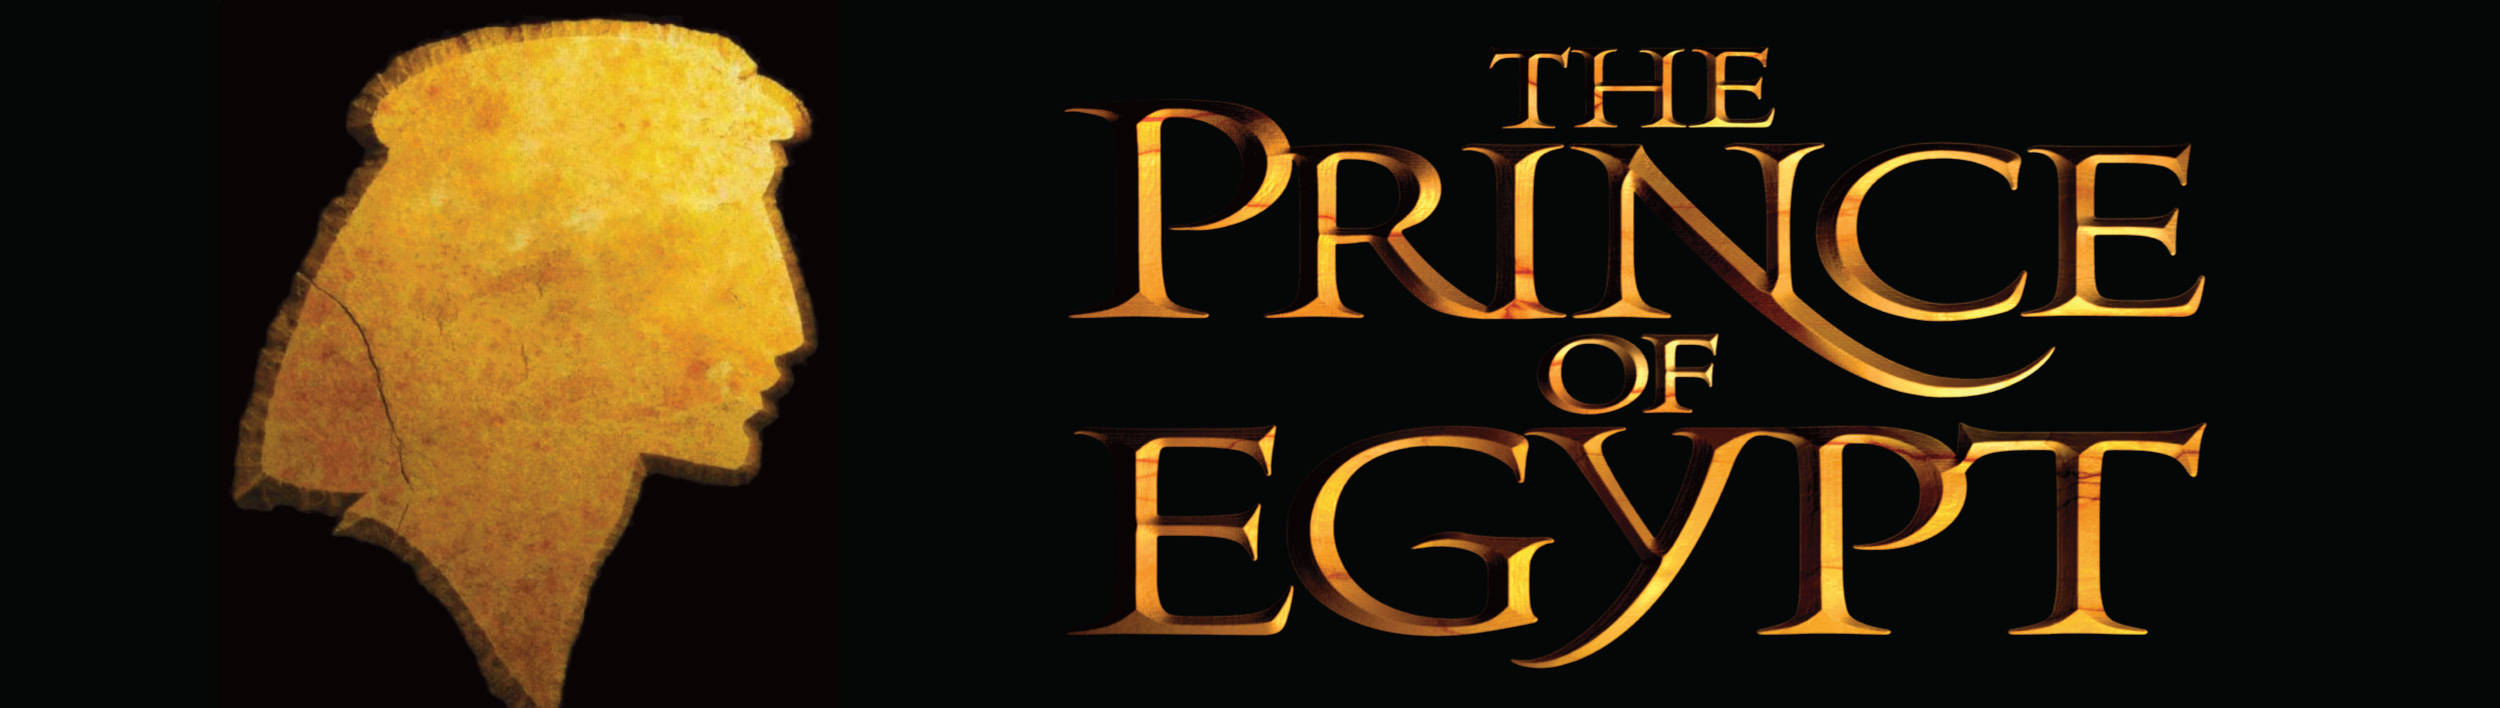 The Prince Of Egypt Cool Poster Wallpaper